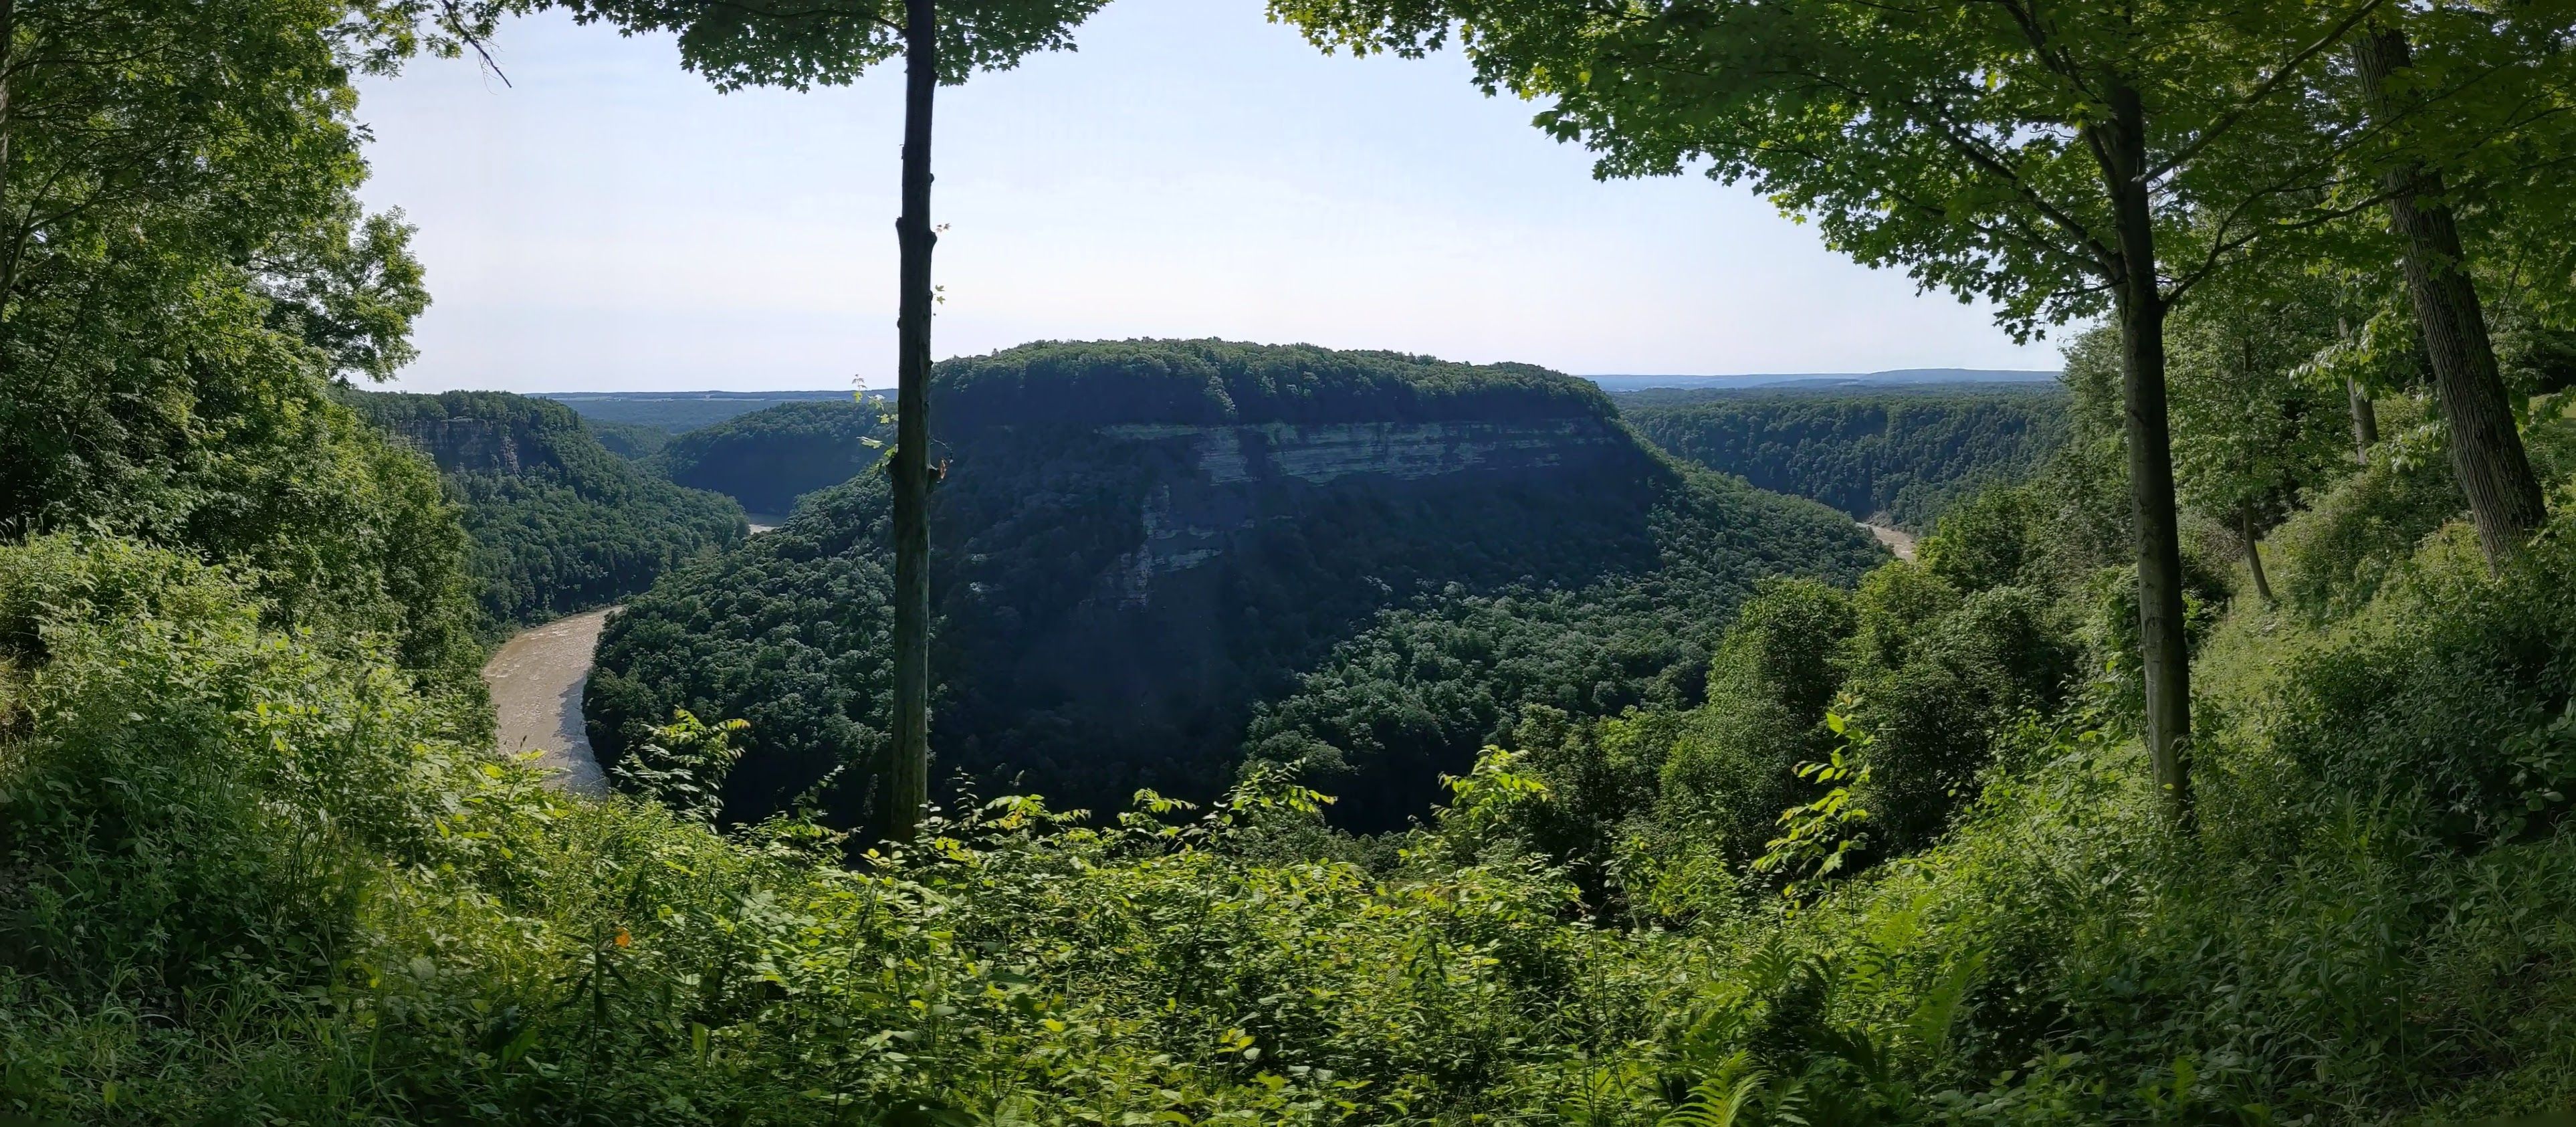 Panorama of the Genesee river and the Letchworth gorge